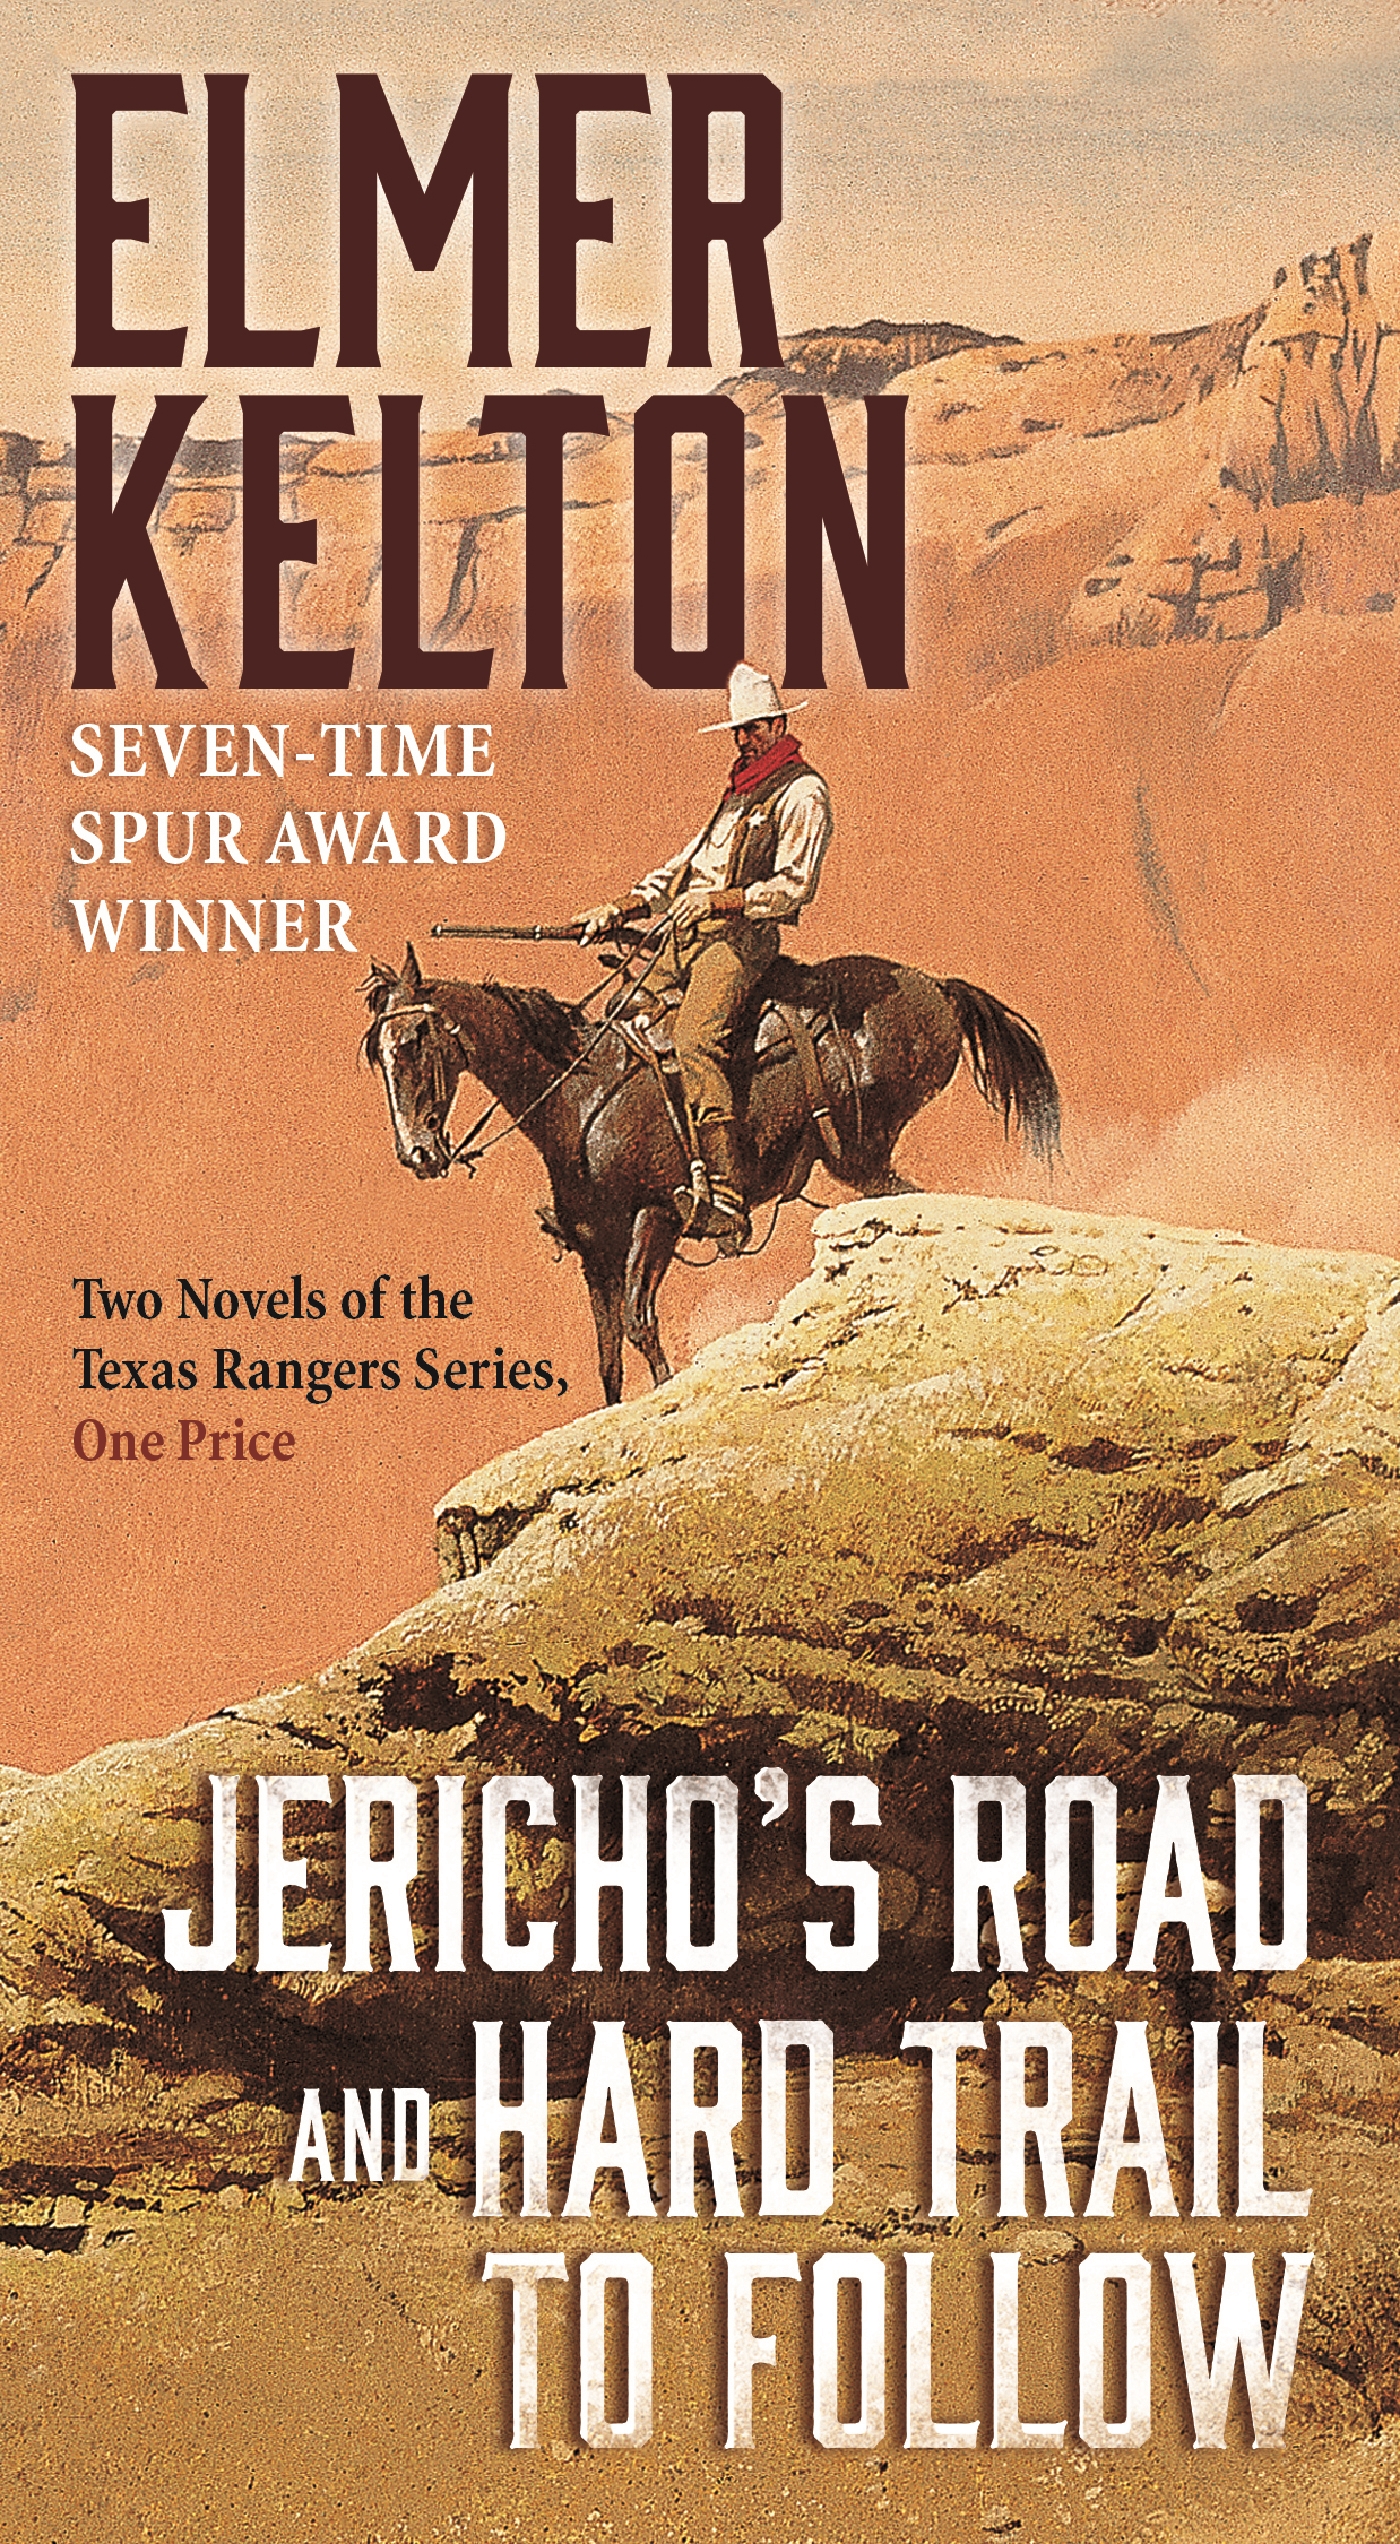 Jericho's Road and Hard Trail to Follow : Two Novels of the Texas Rangers Series (6 and 7) by Elmer Kelton